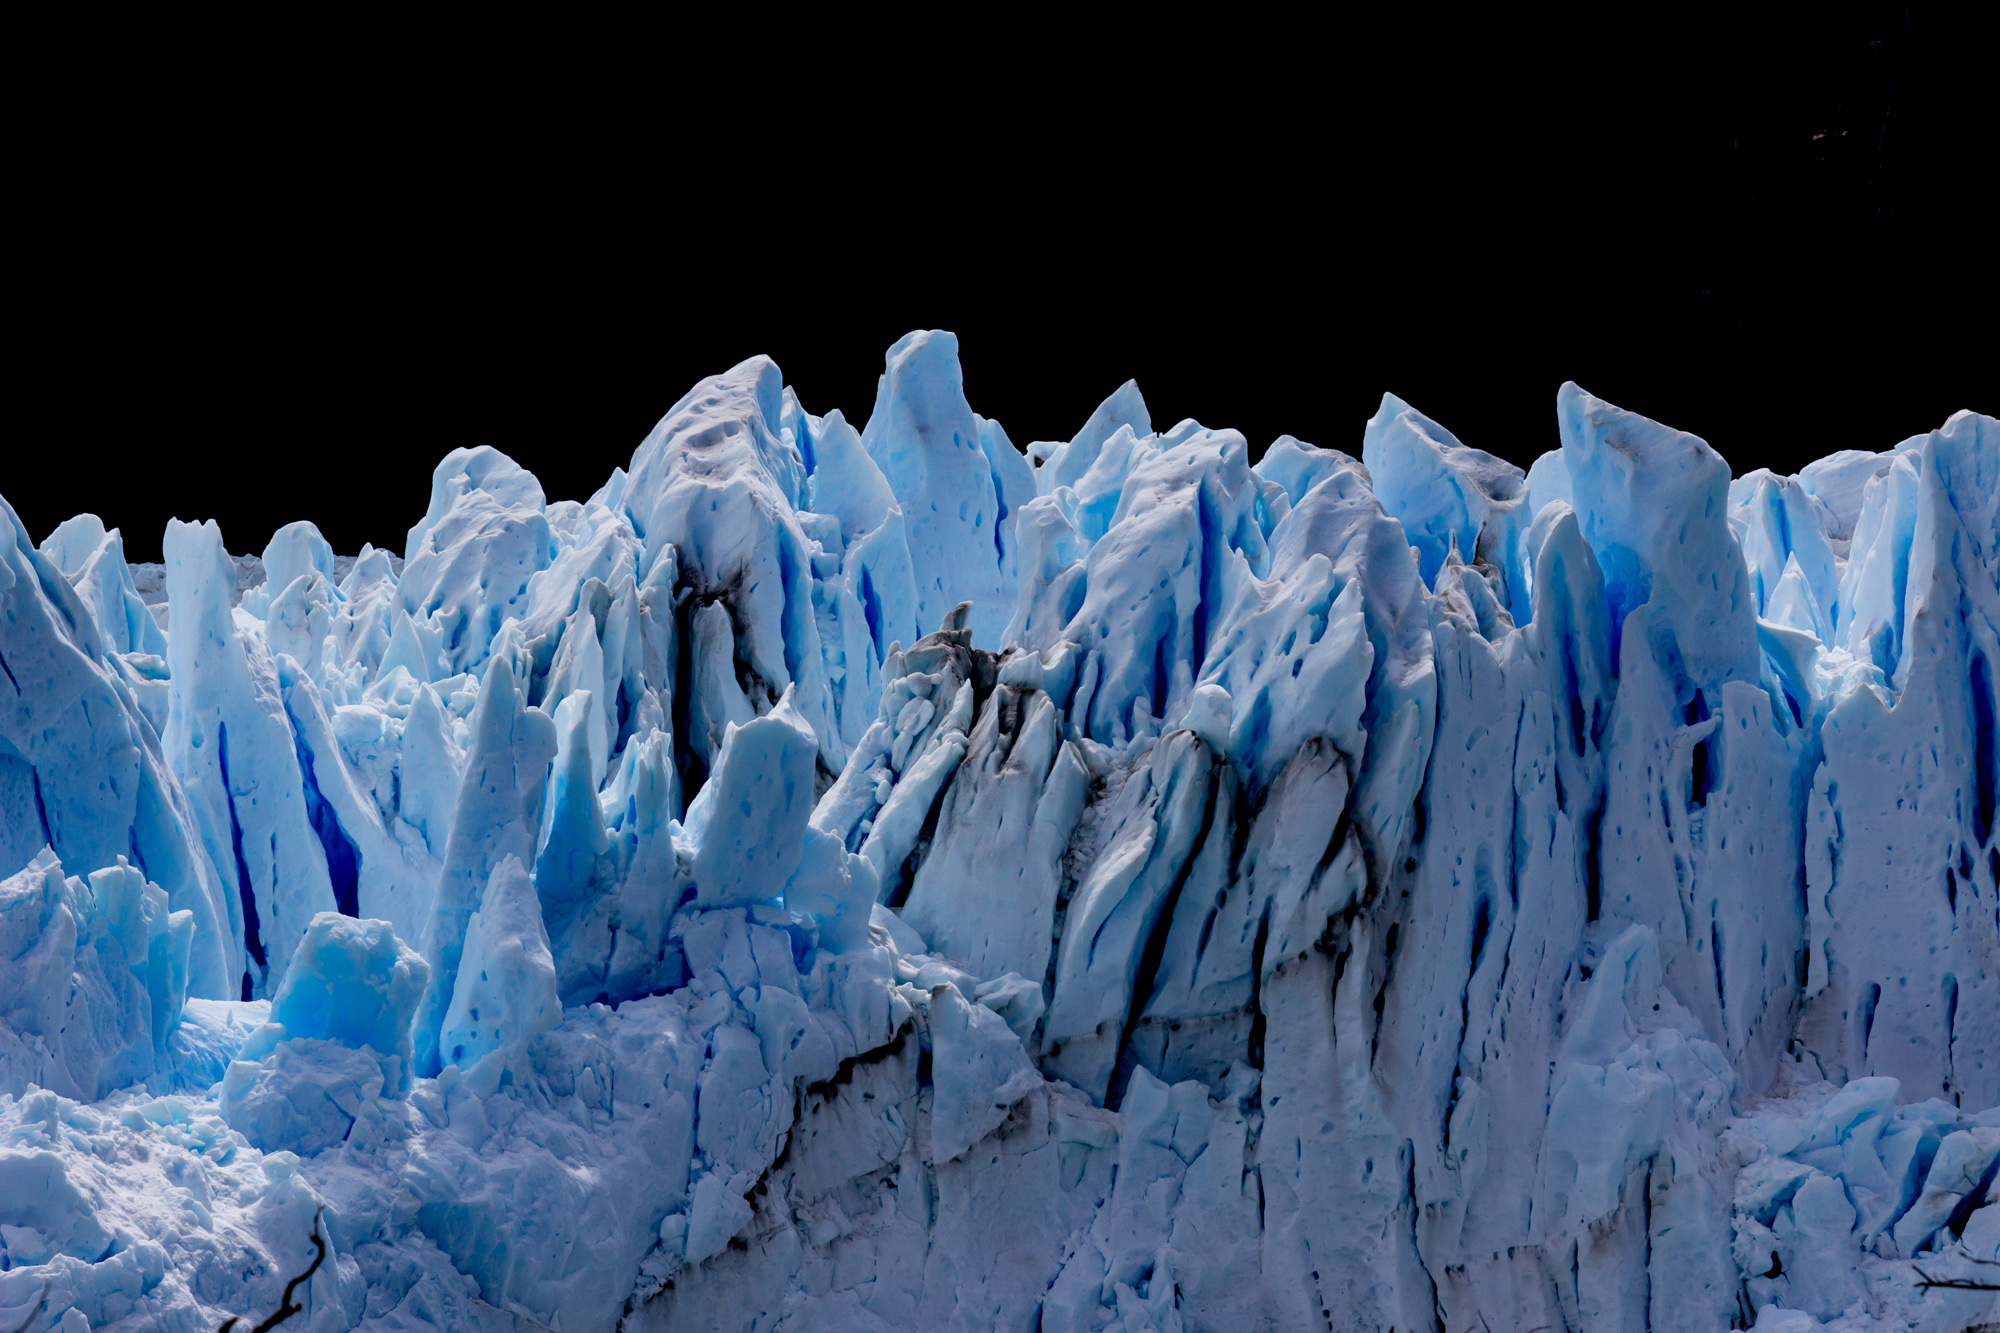 Stark contrasts on the Perito Moreno glacier as shafts of sunlight illuminate the tottering ice towers